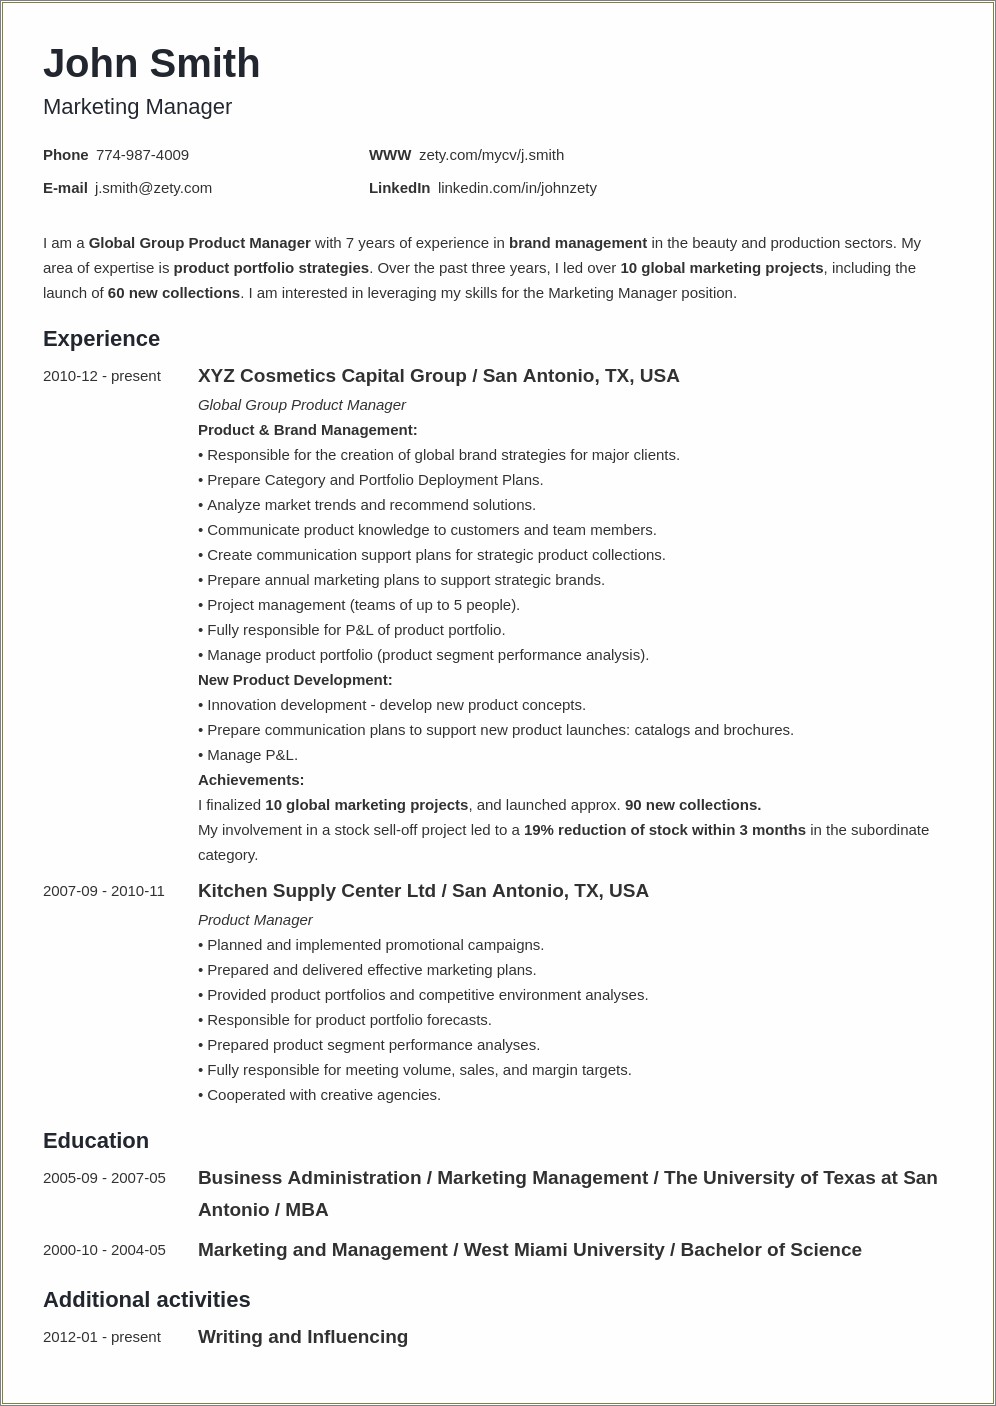 Resume Template Skills History And Education Sections